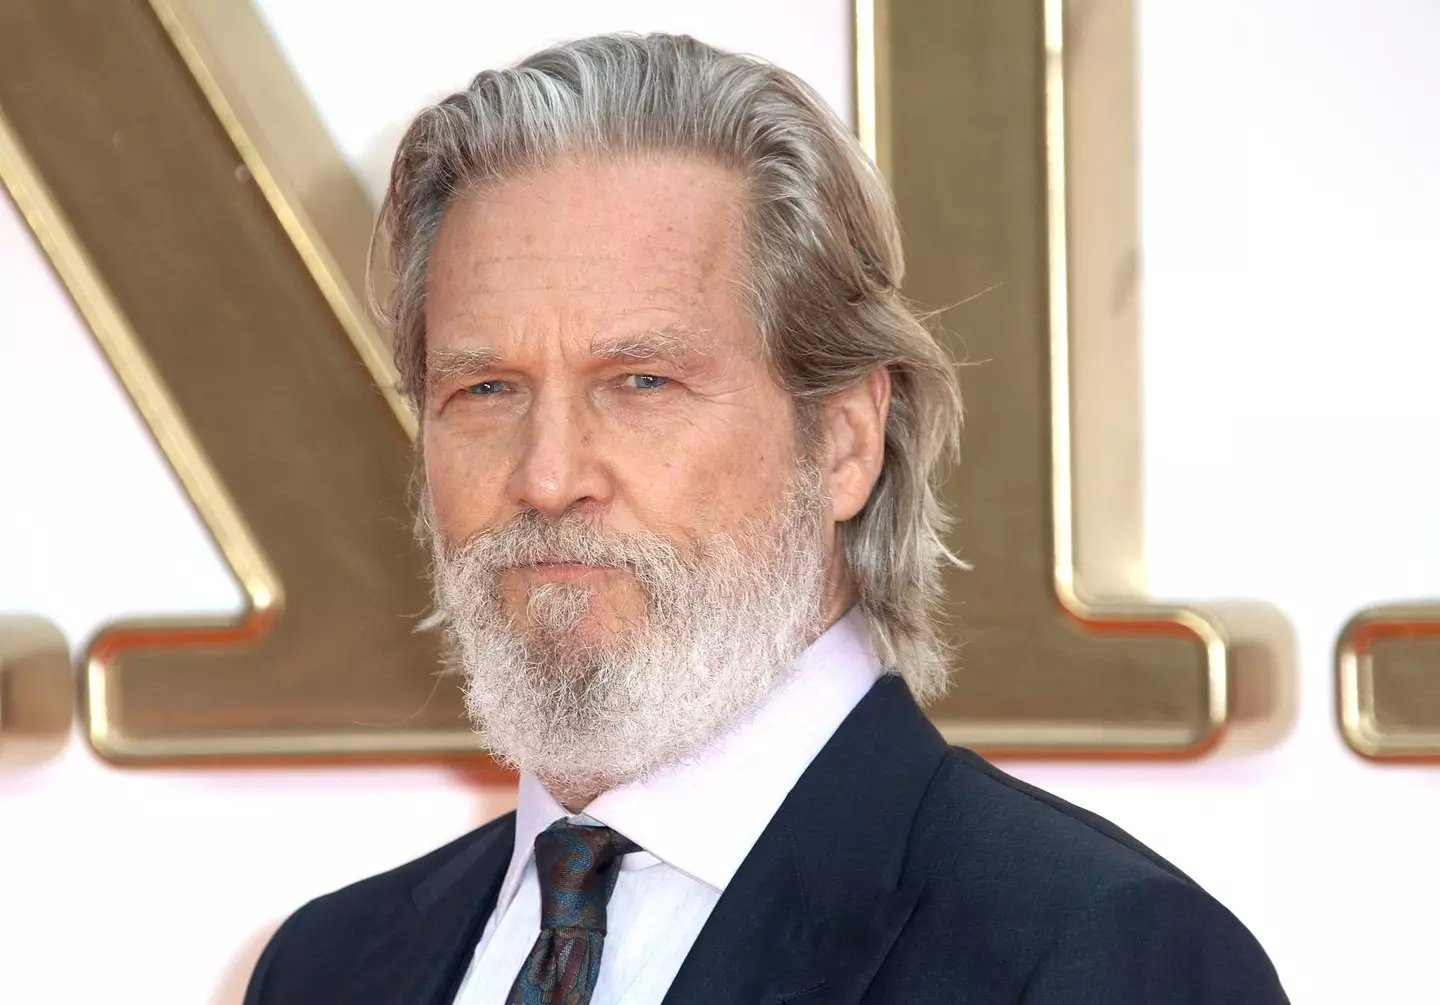 Jeff Bridges was diagnosed with cancer in 2020.